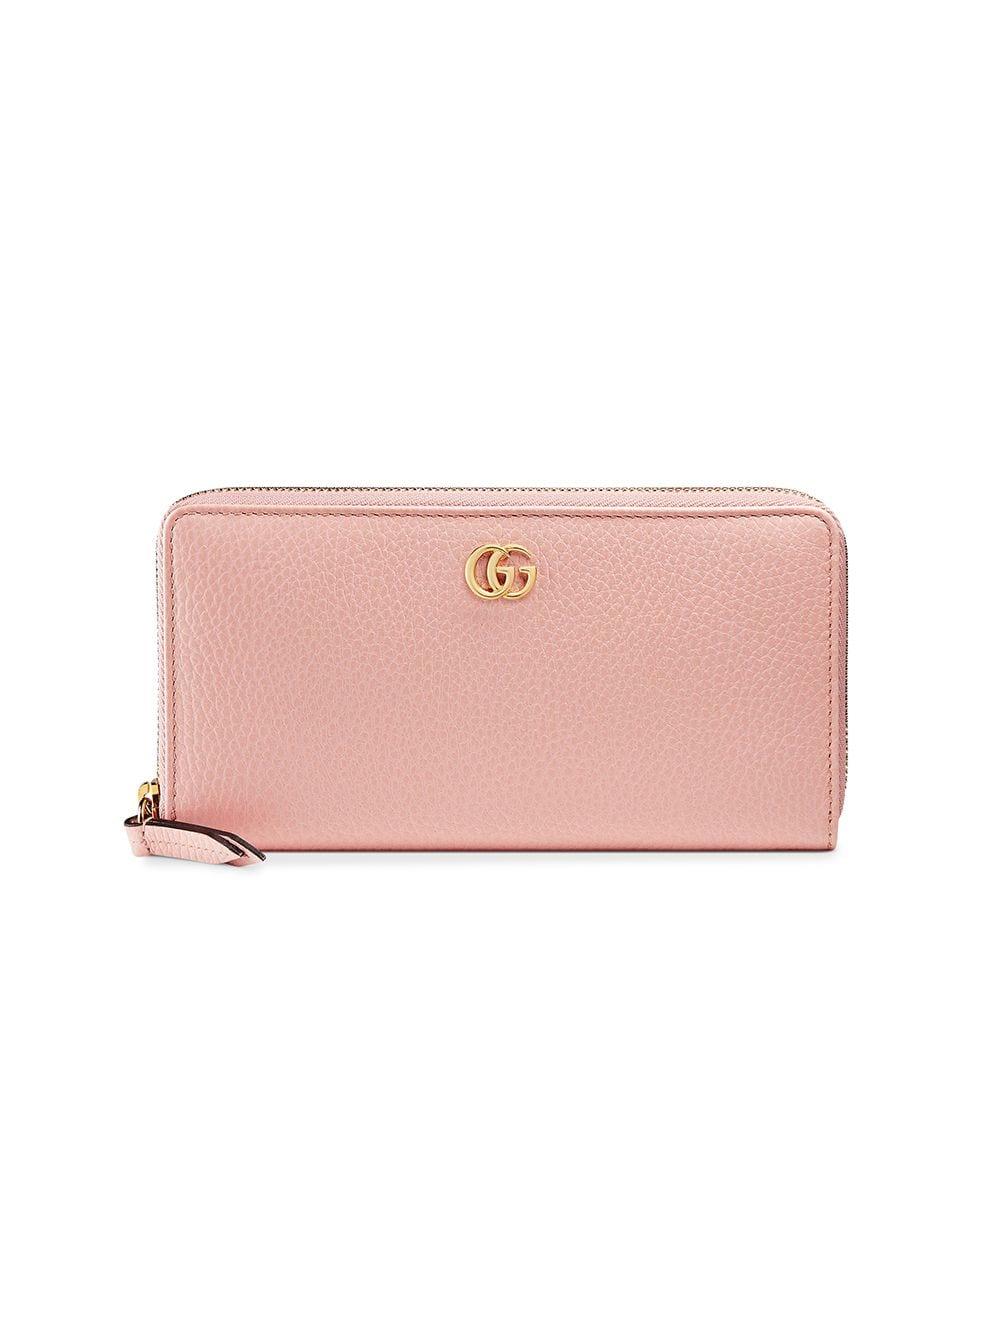 Gucci Leather Zip Around Wallet in Pink - Lyst